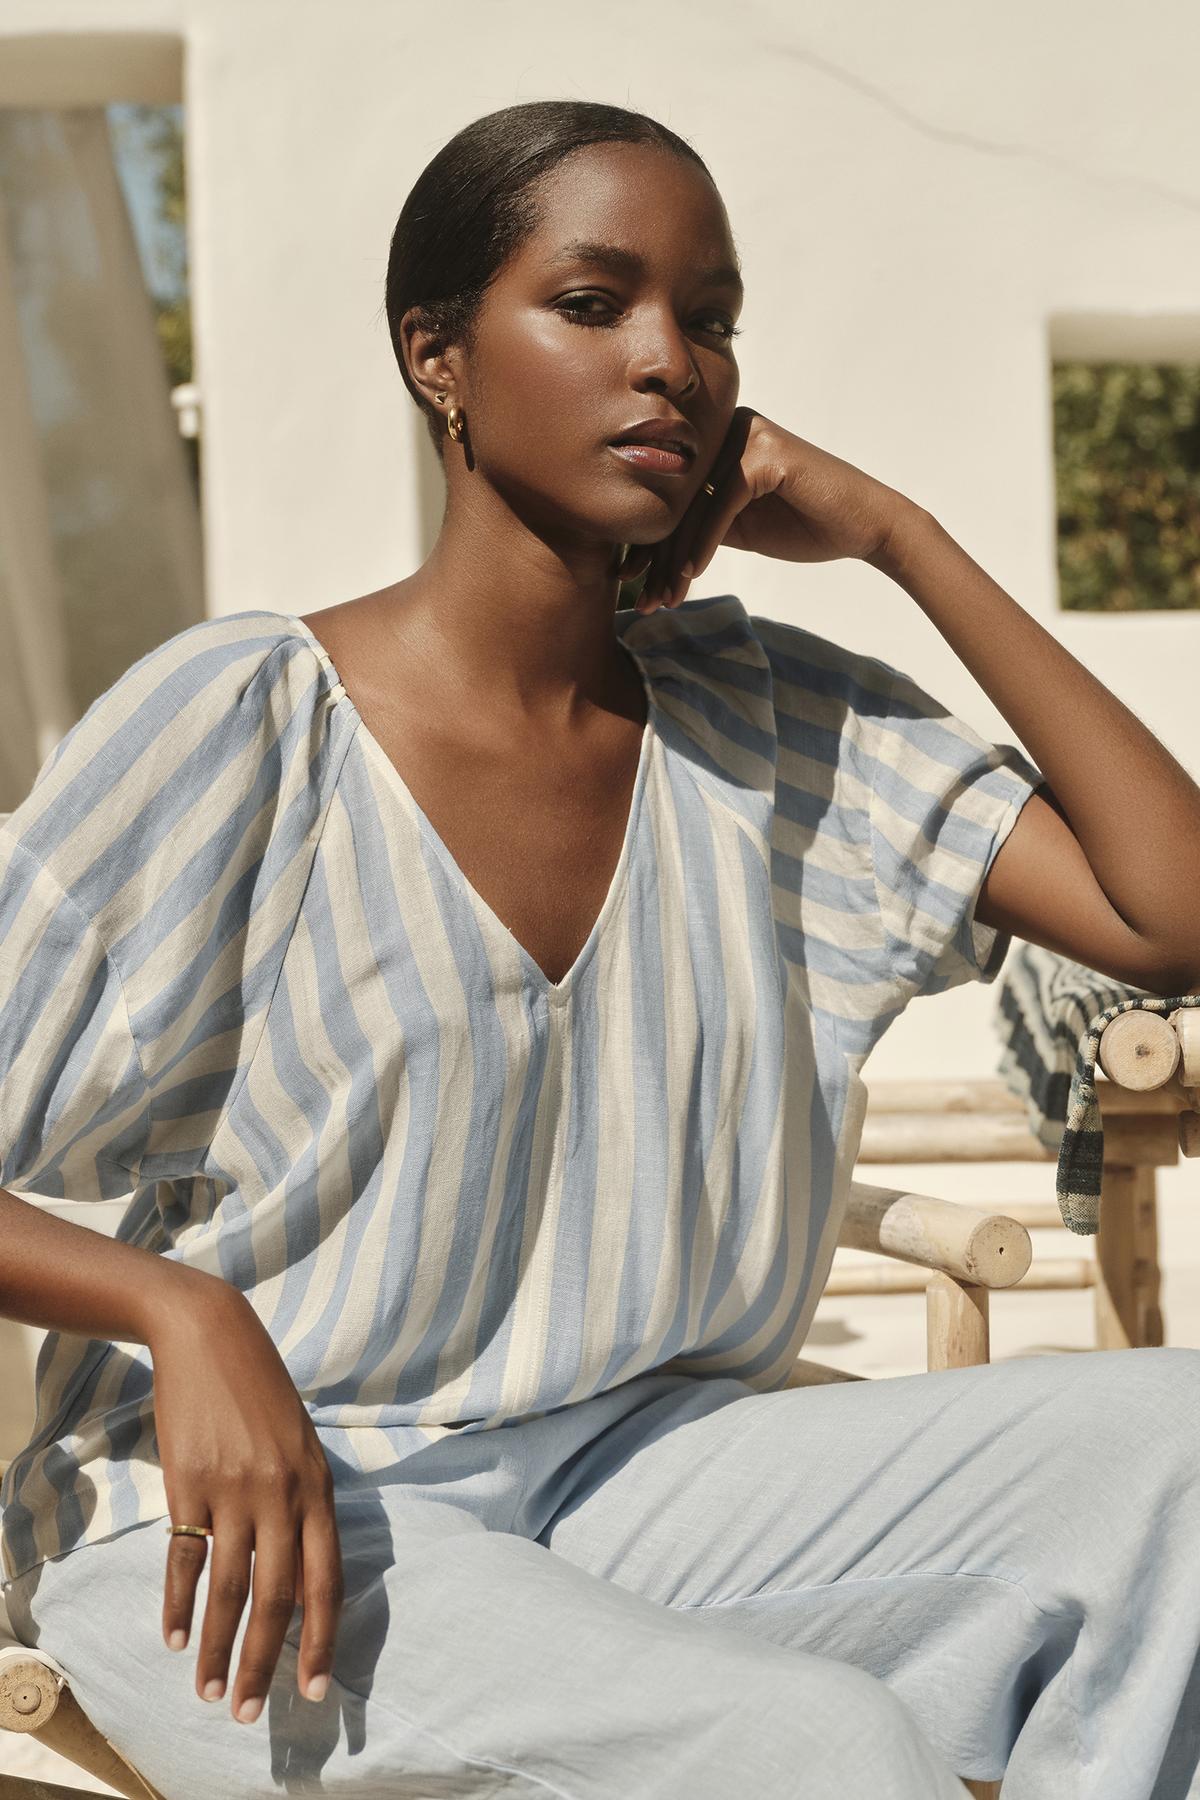 A woman in a KATY STRIPED LINEN TOP by Velvet by Graham & Spencer, with West Coast vibes, sitting on a chair.-36161171620033